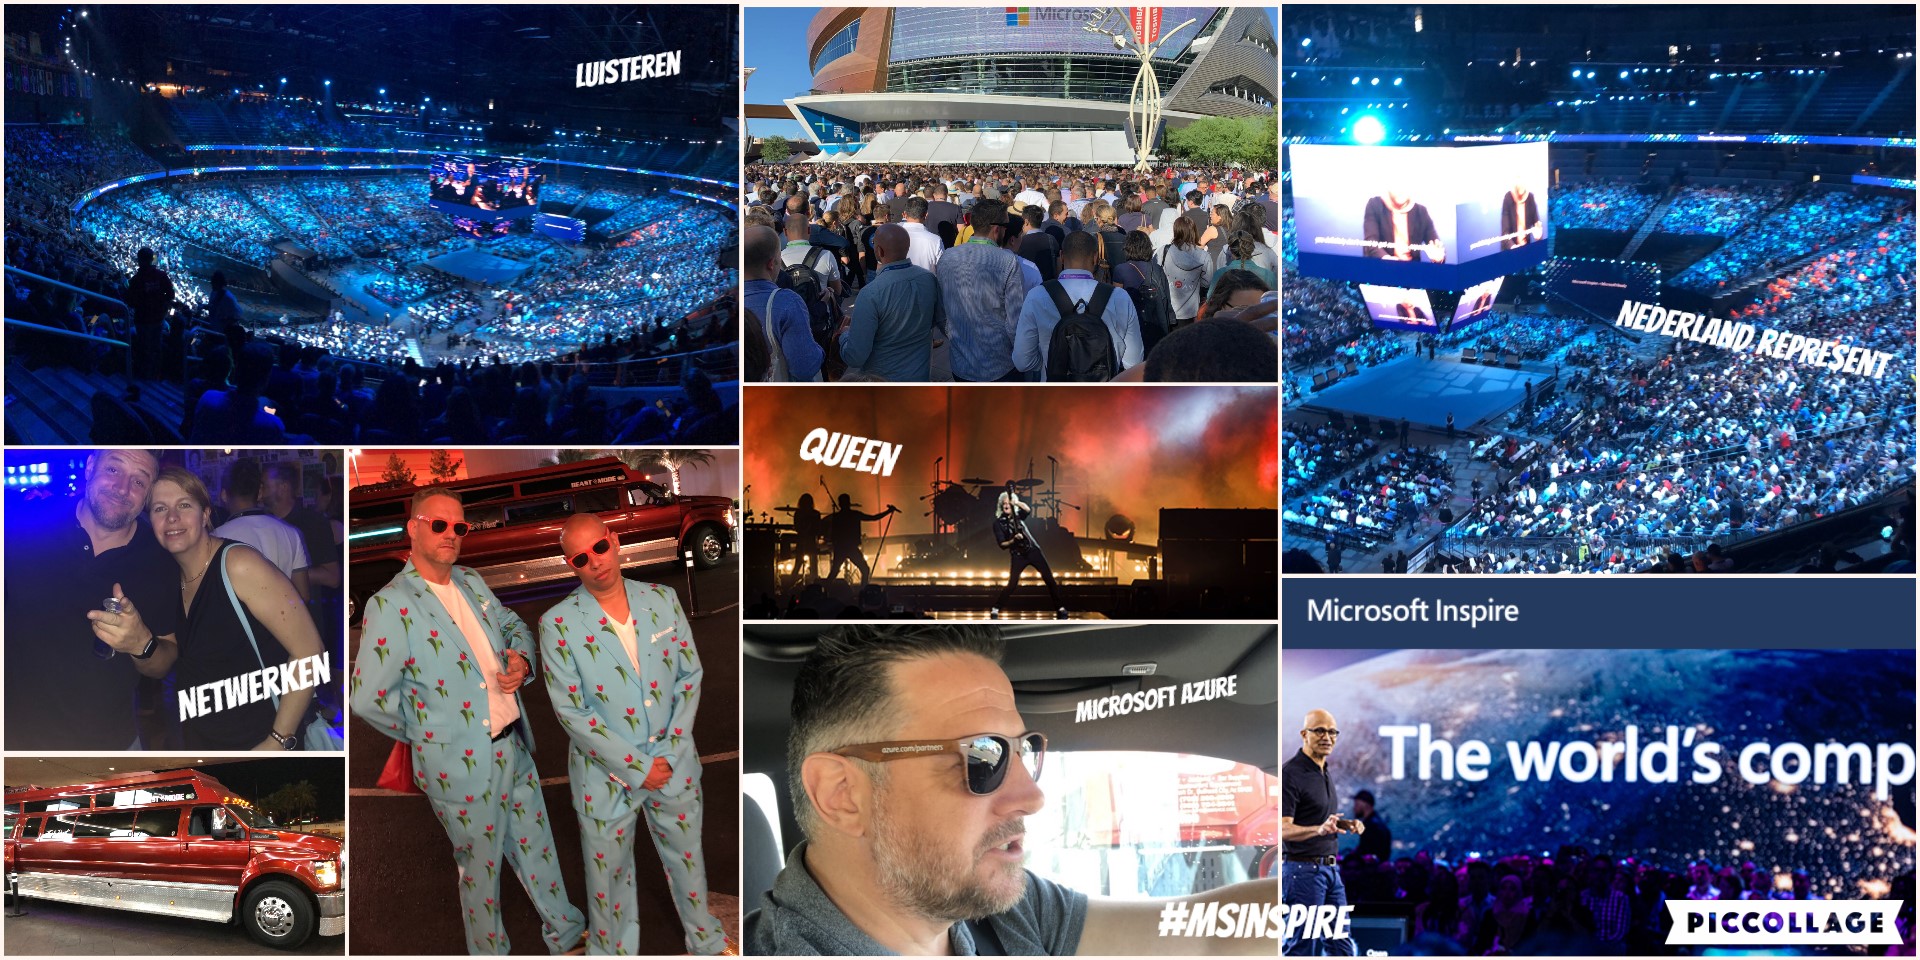 It’s (almost) a wrap….Microsoft Inspire 2019, we had a blast!